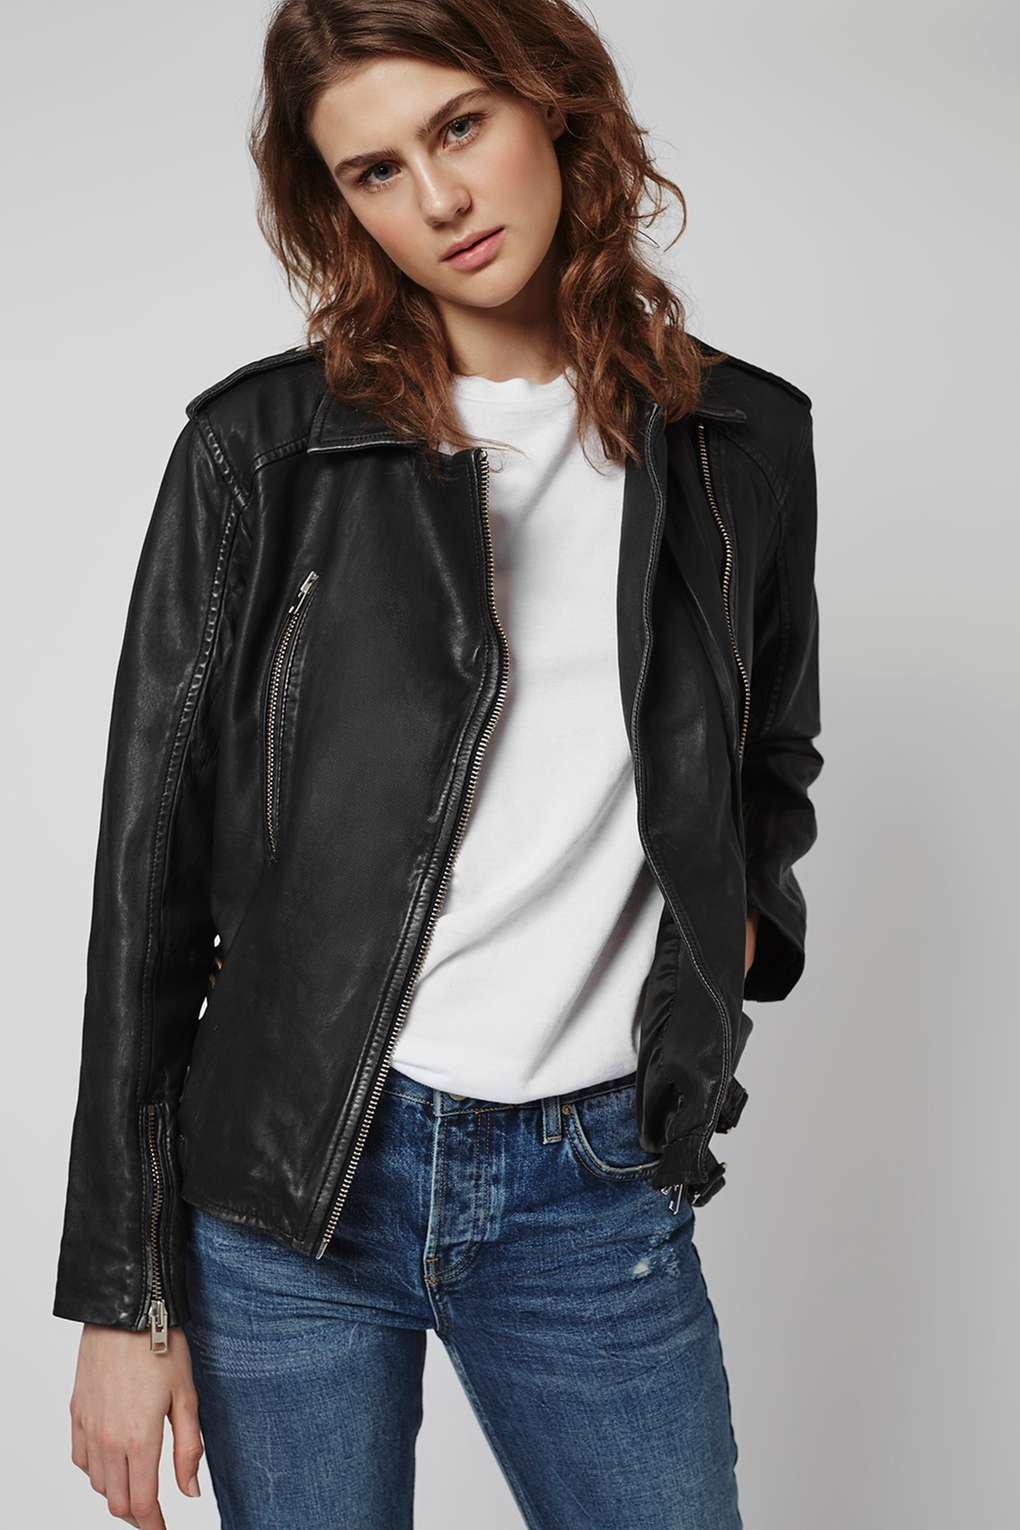 Lyst - Topshop Tall Oversized Leather Jacket in Black